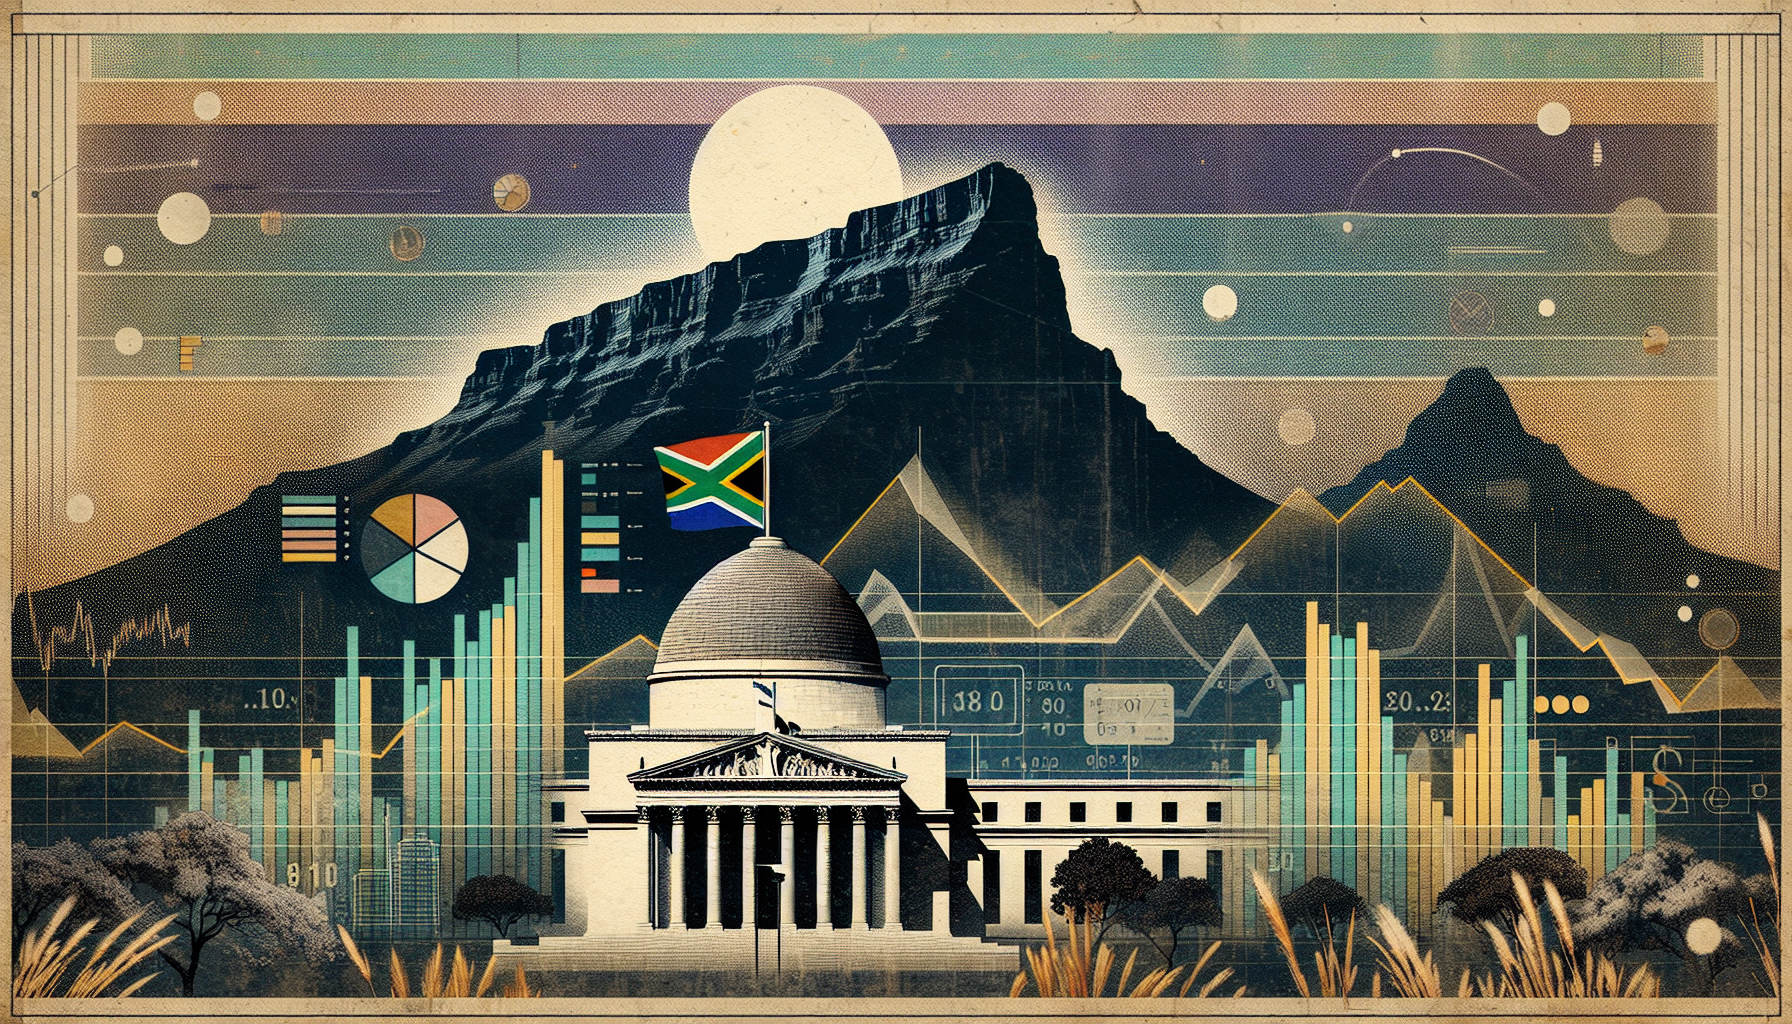 South Africa’s Economy Shines on the Global Stage